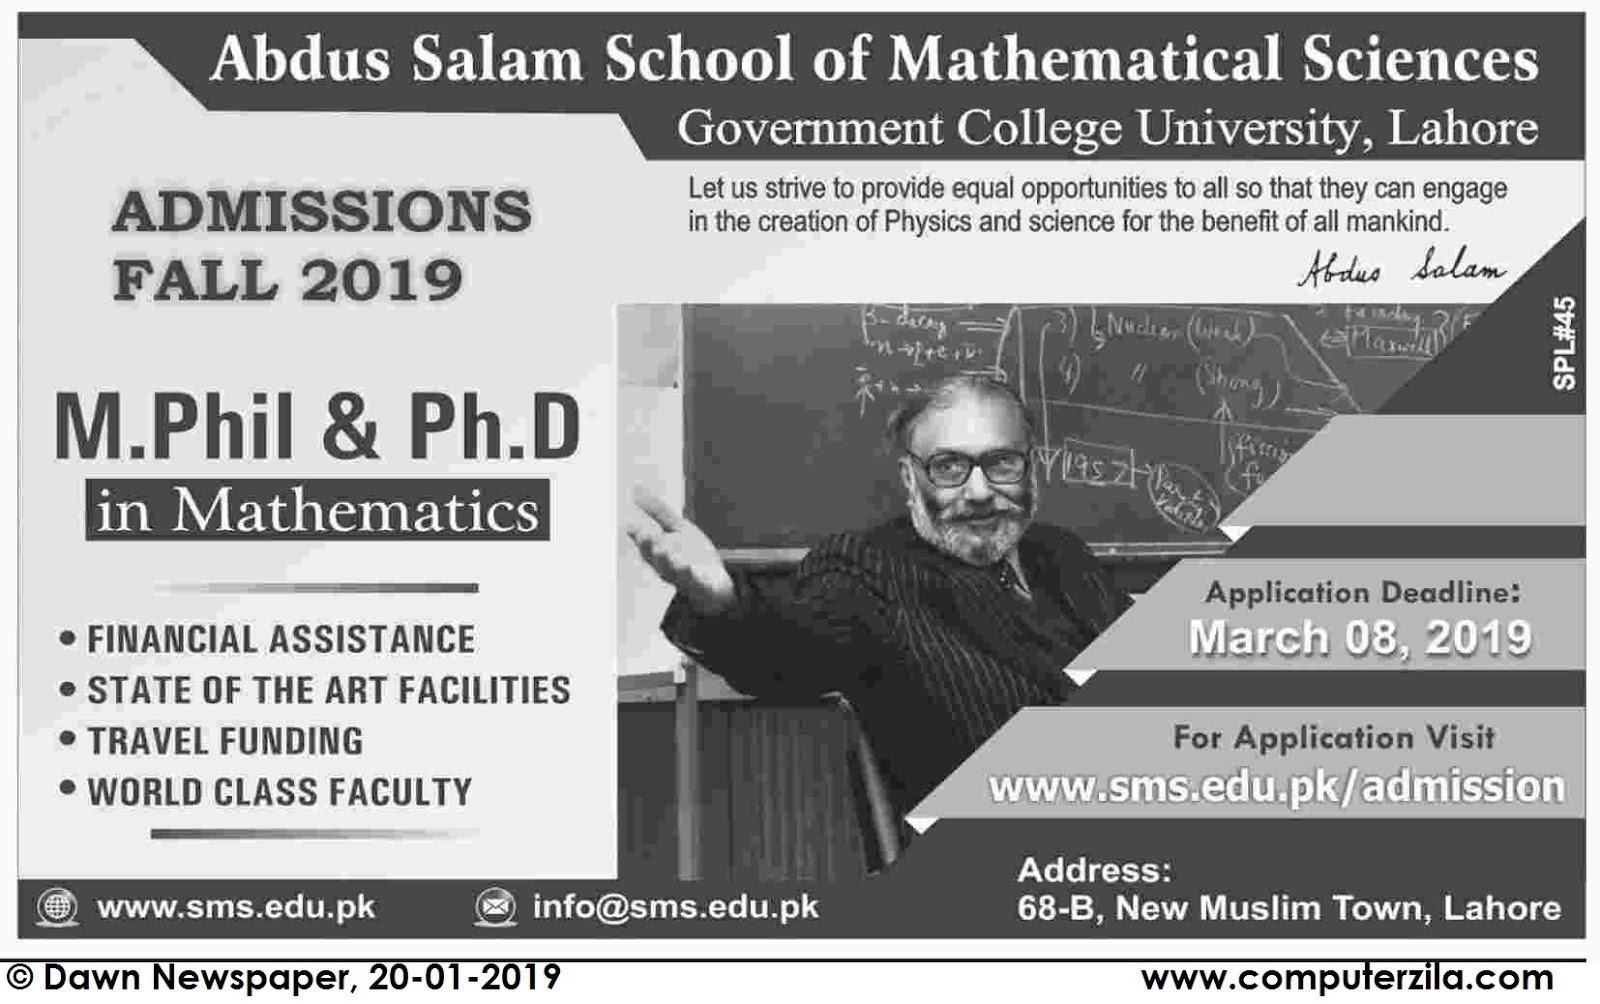 Admissions Open For Spring 2019 At AS-SMS undefined Campus